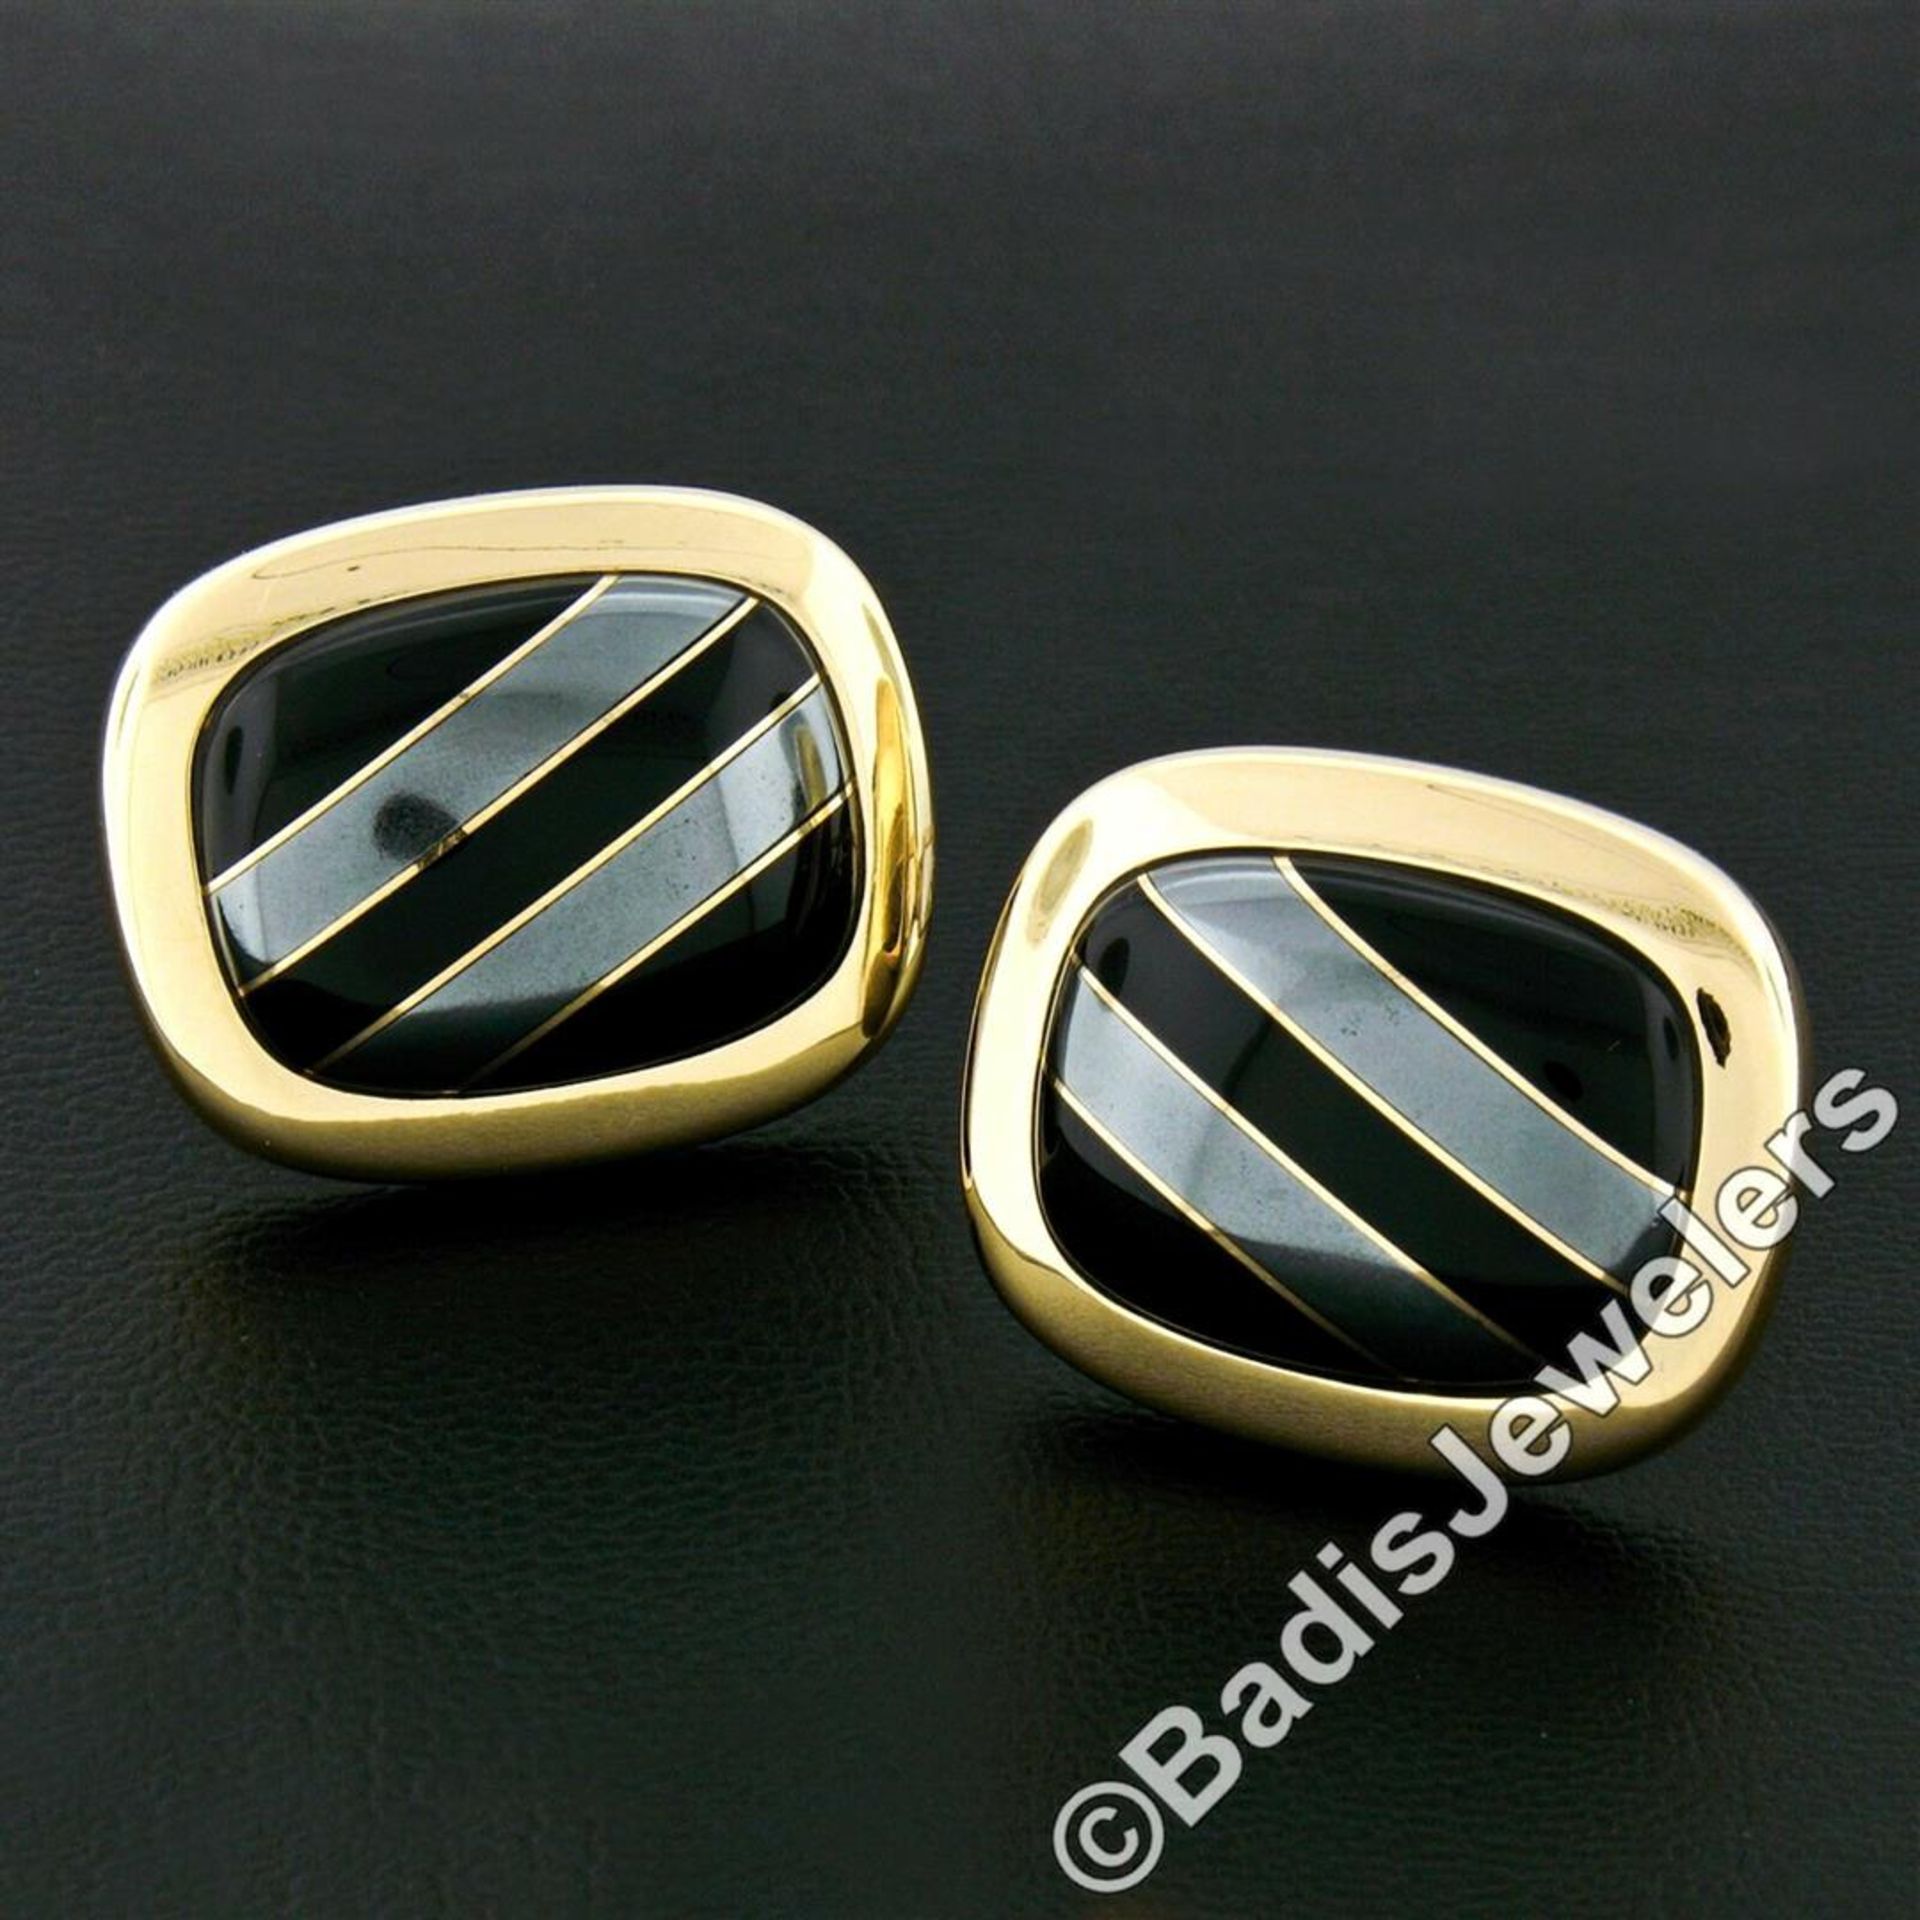 Vintage 14kt Yellow Gold Swivel Cuff Links w/ Hematite Inlaid in Black Onyx - Image 2 of 6